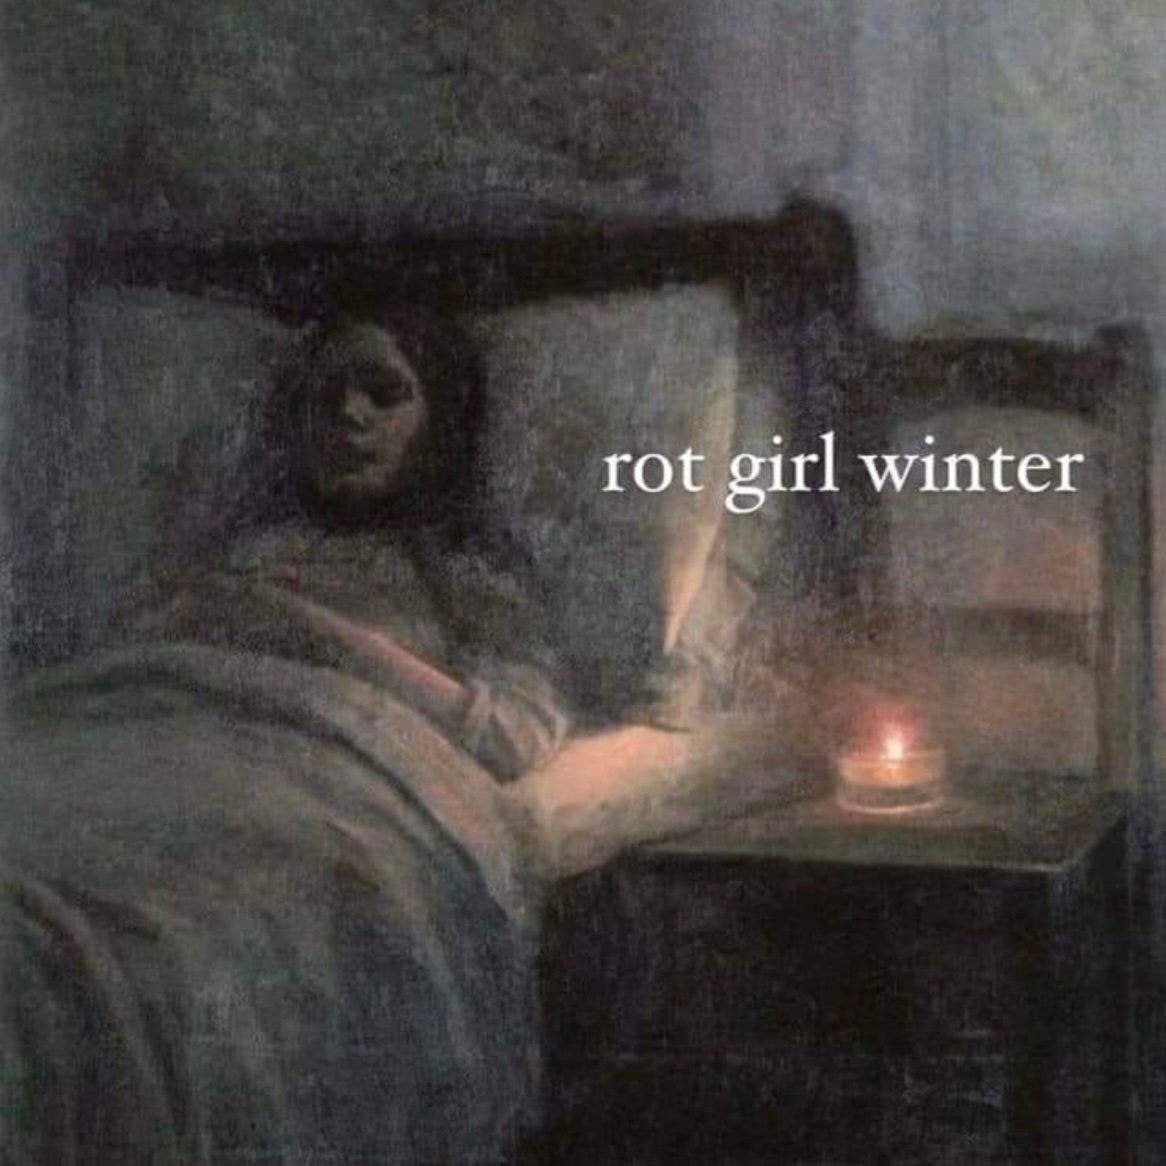 a meme of an old painting of someone in bed by candle light that says rot girl winter